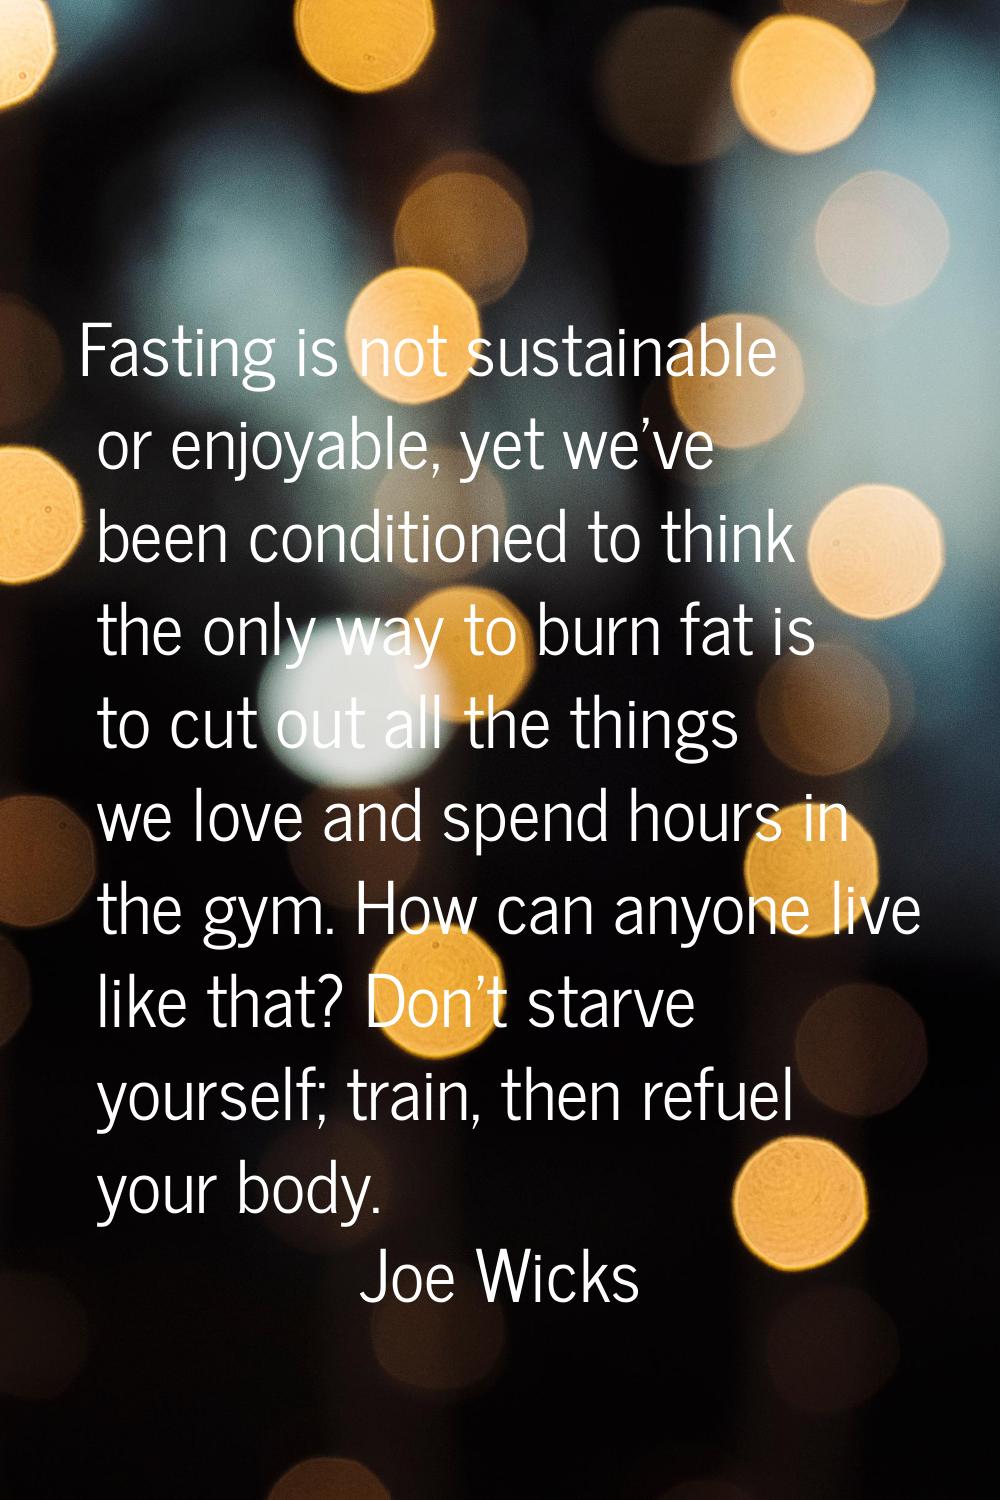 Fasting is not sustainable or enjoyable, yet we've been conditioned to think the only way to burn f